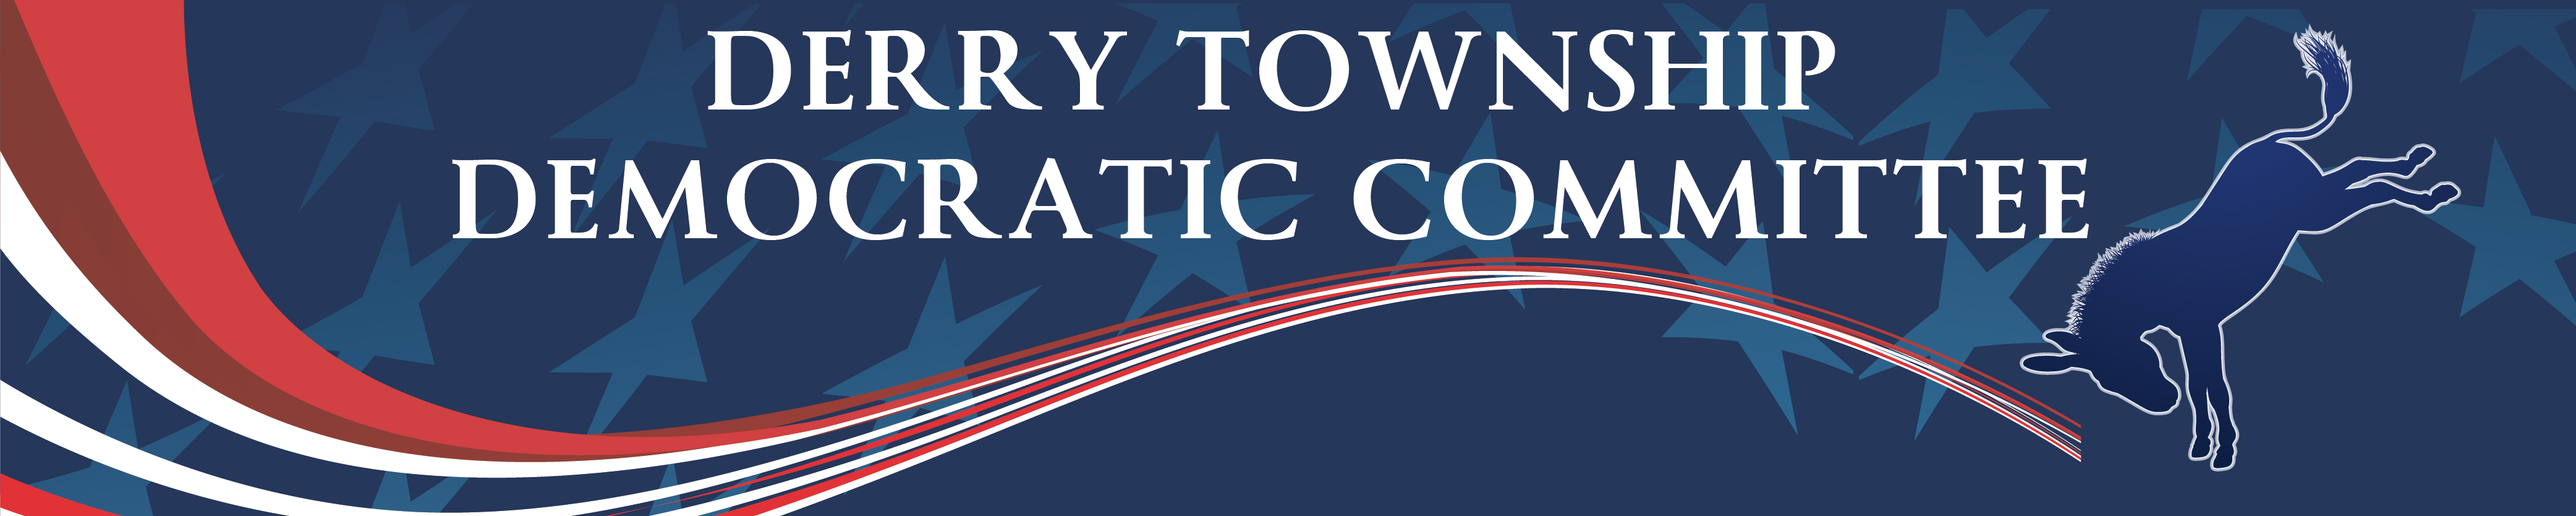 Derry Township Democratic Committee